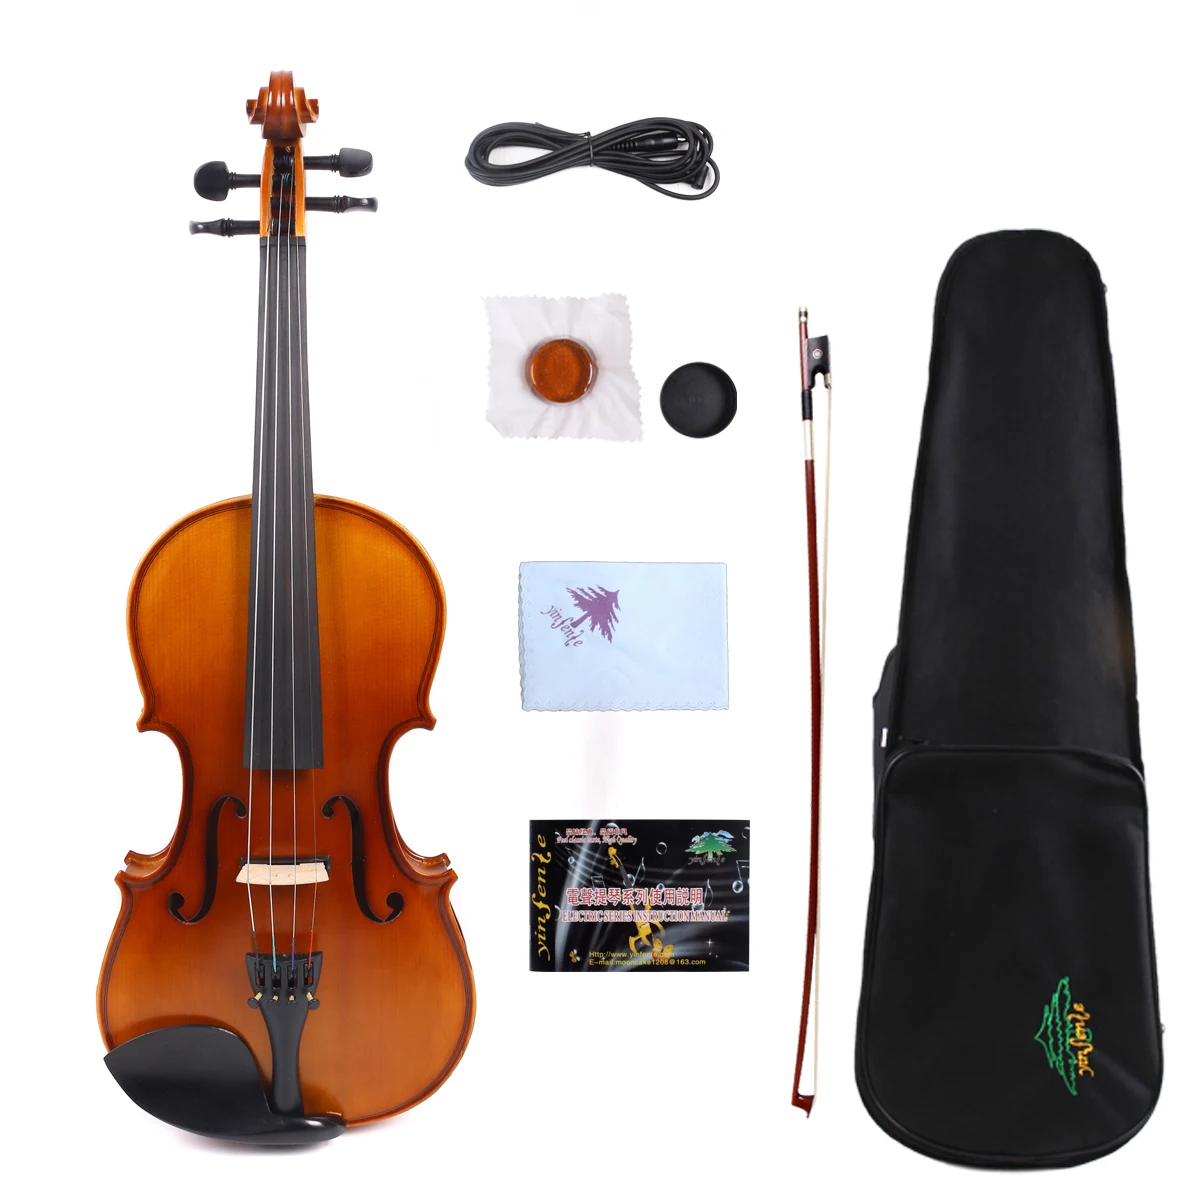 

Yinfente Electric Acoustic Violin 1/2 1/4 1/8 3/4 4/4 Maple+Spruce Handmade Free Case+Bow+Cable #EV1